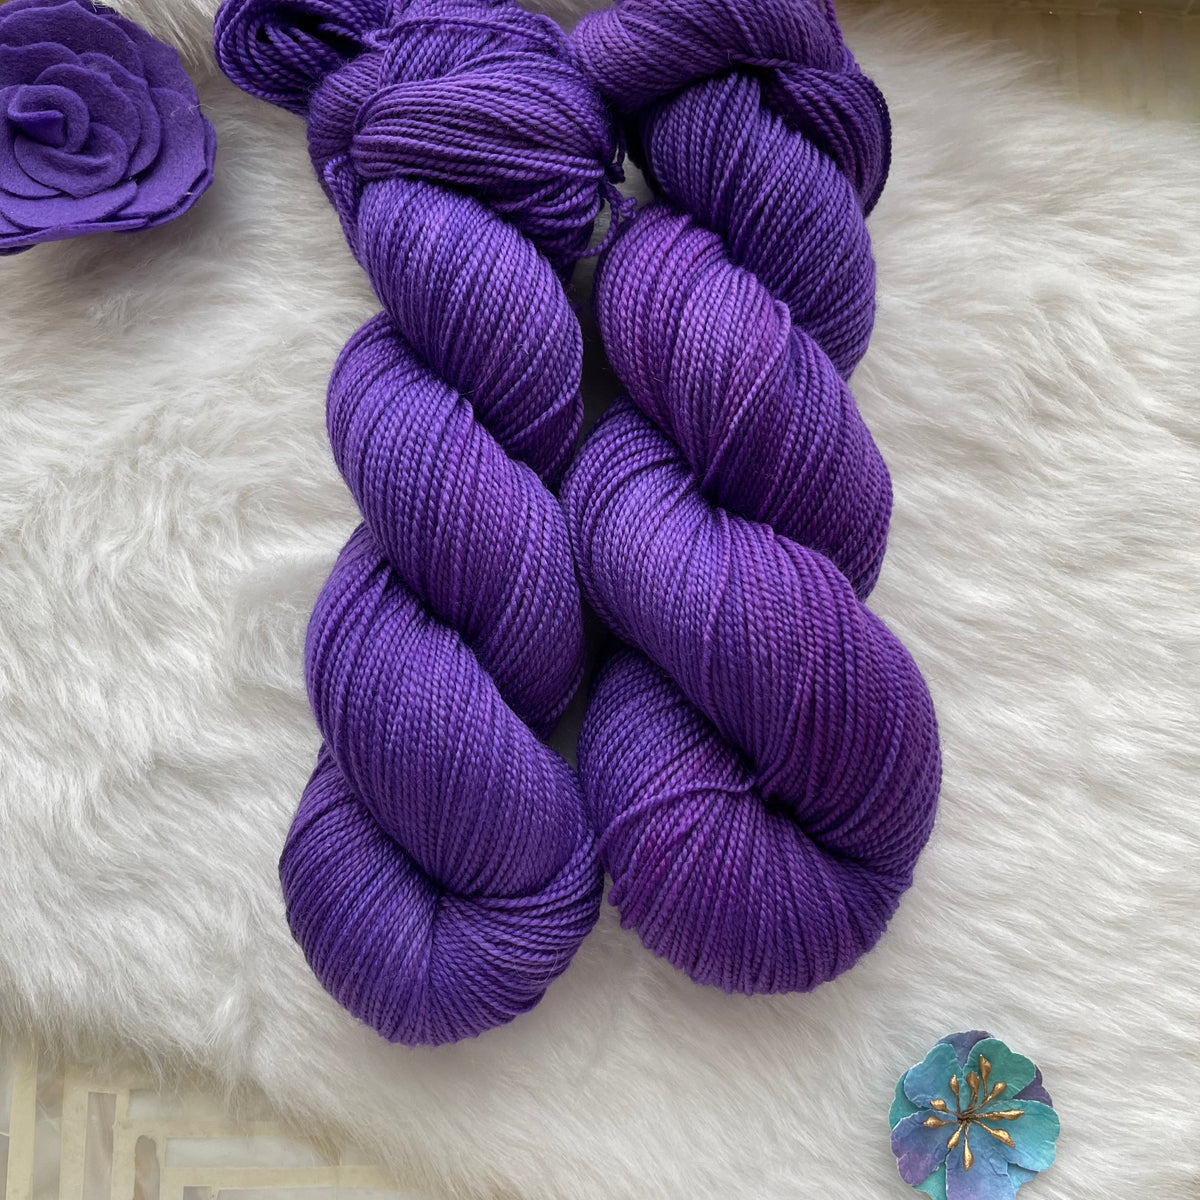 ROYALS - Dyed to Order - Hand Dyed Yarn Skein